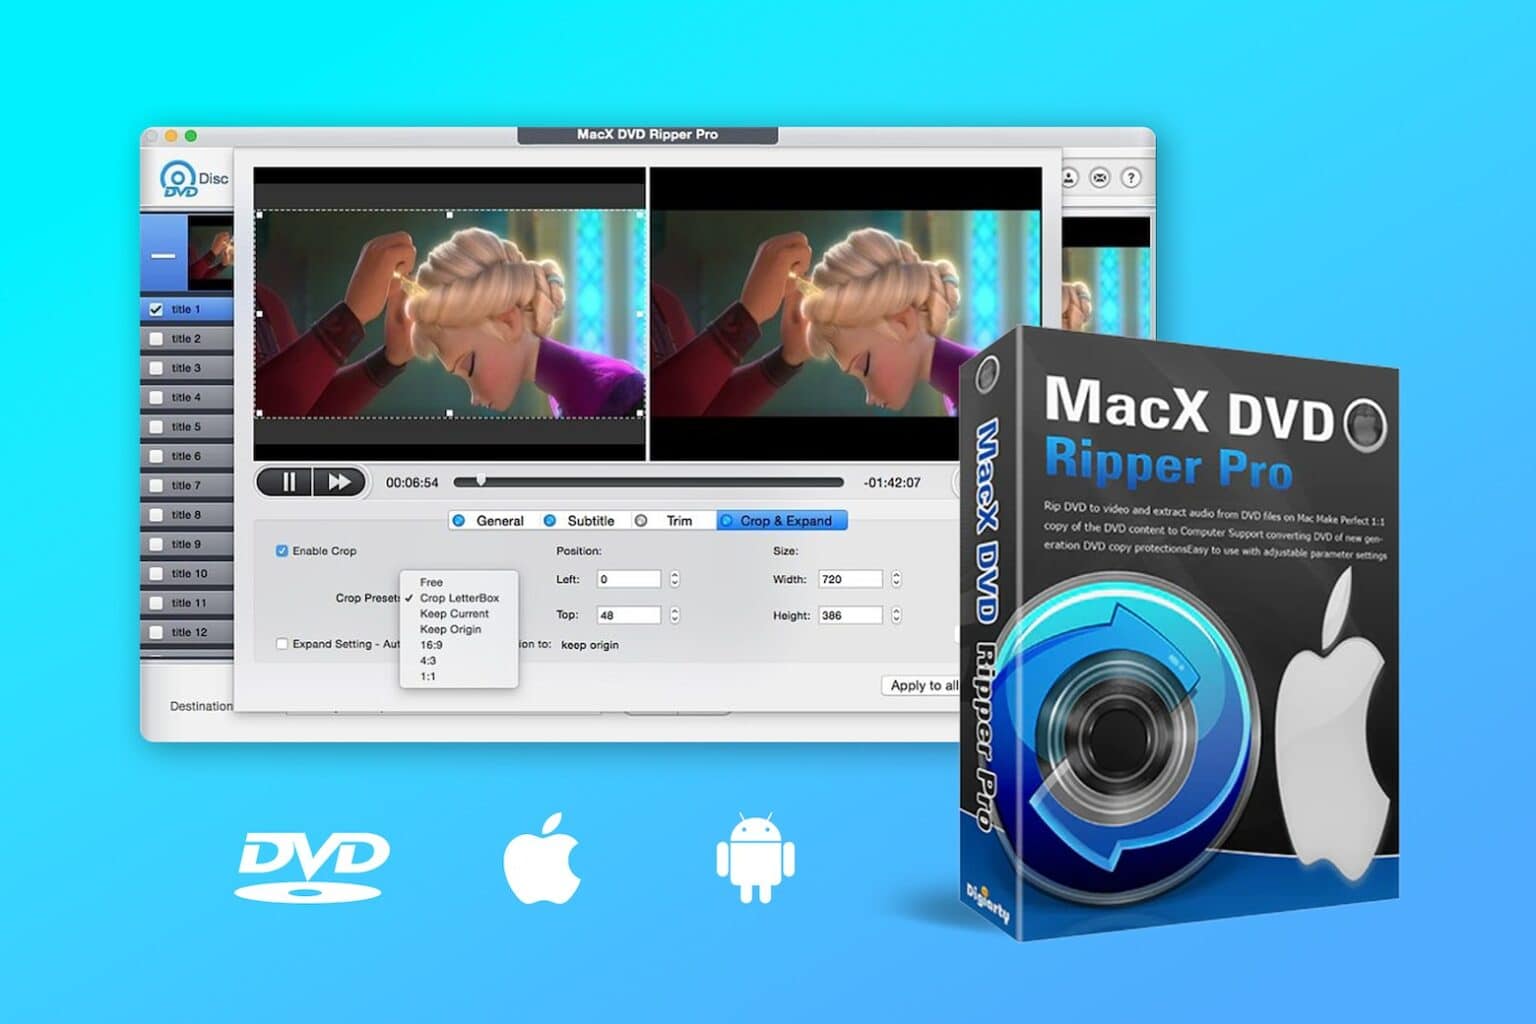 Rip DVDs on Mac into digital versions with this $31.97 tool.